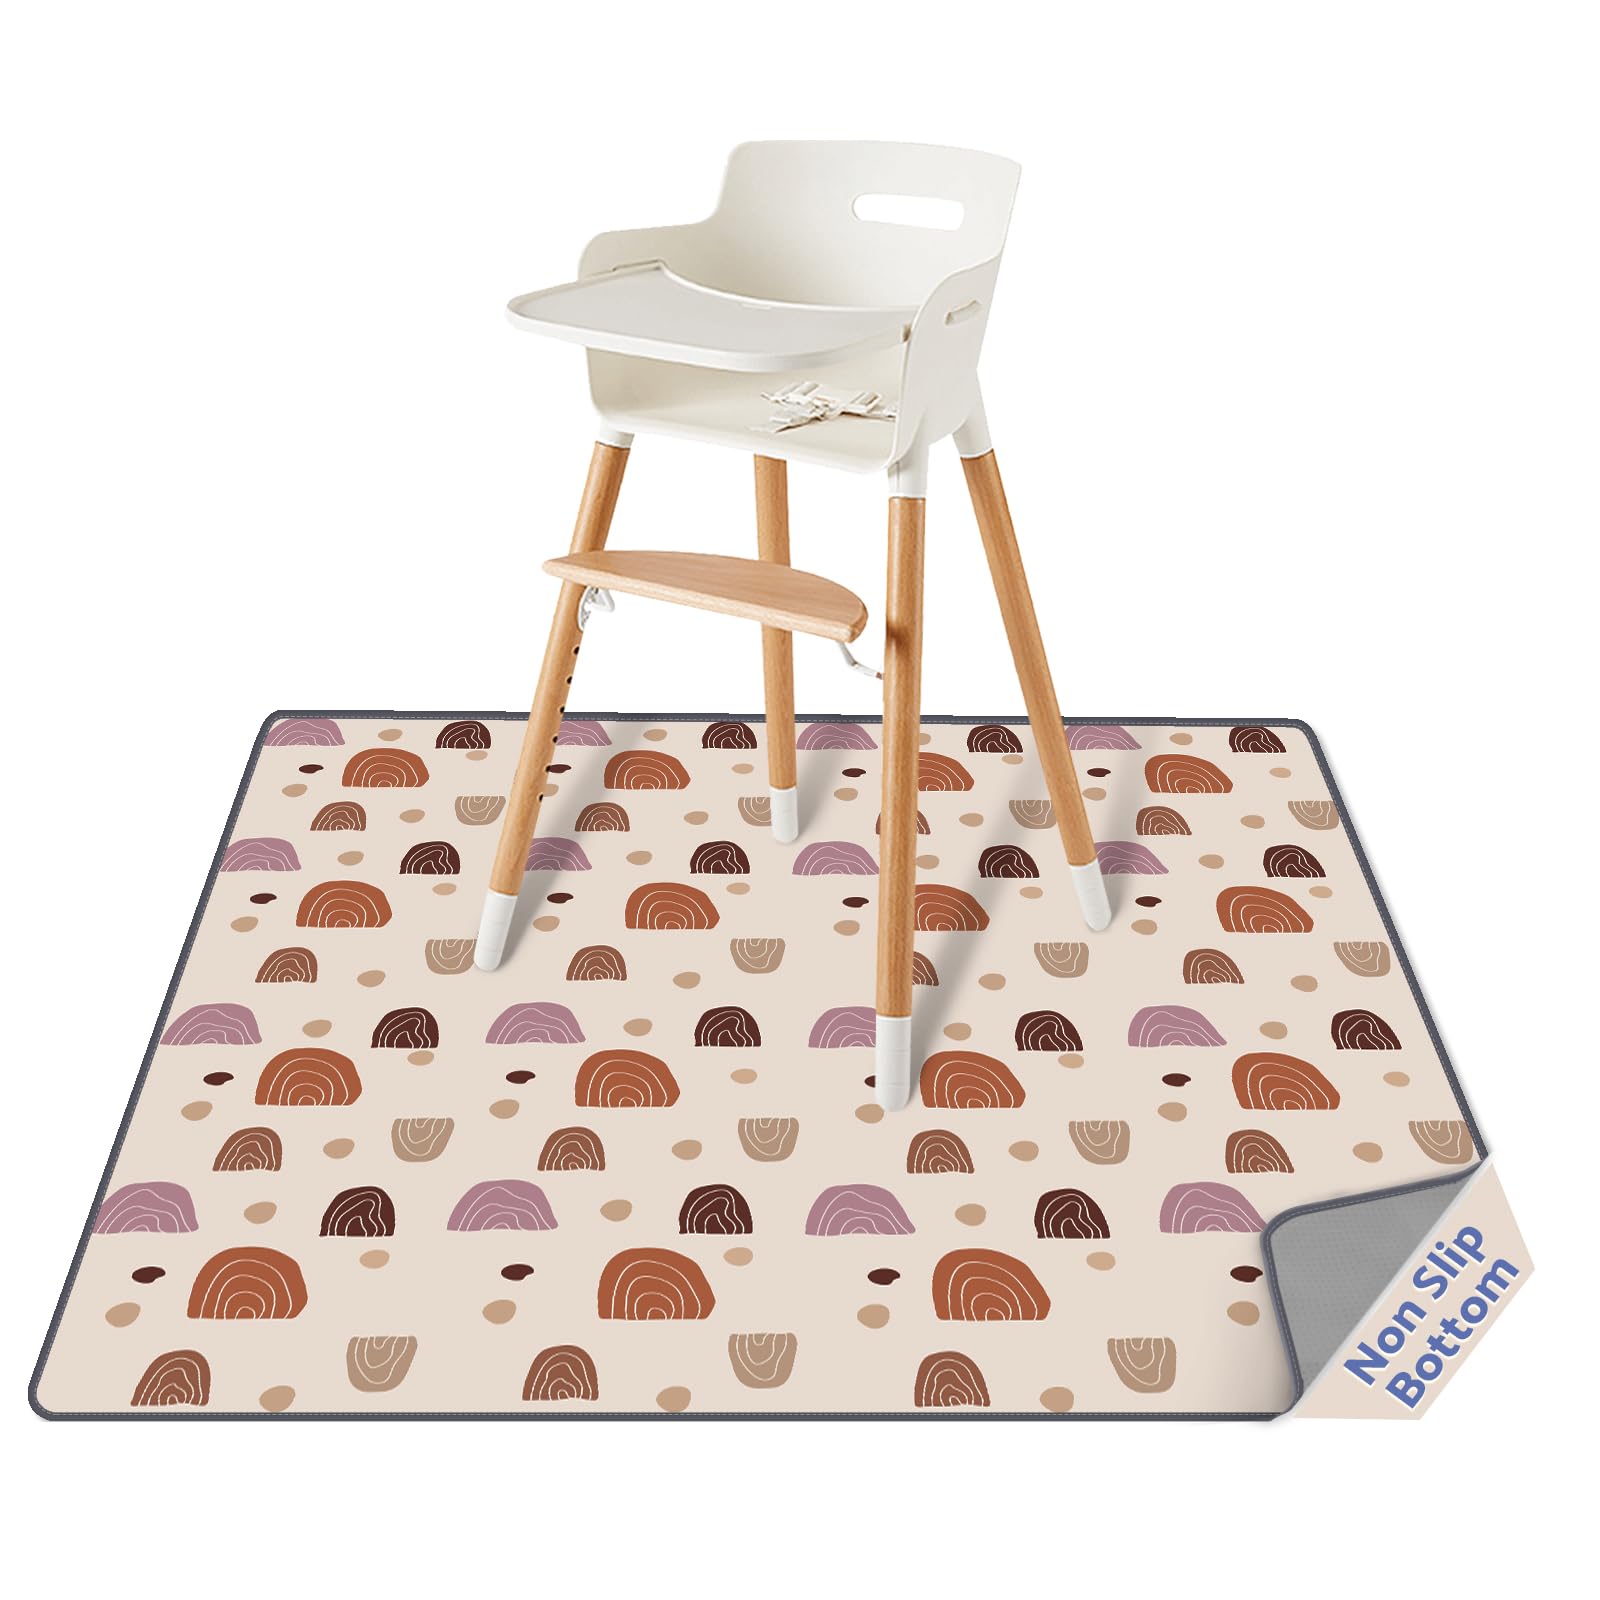 Baby Splat Mat for Under High Chair, 51 x 51 Inch Boho Splash Mat, Waterproof and Washable Spill Mat, Anti-Slip Floor Protector